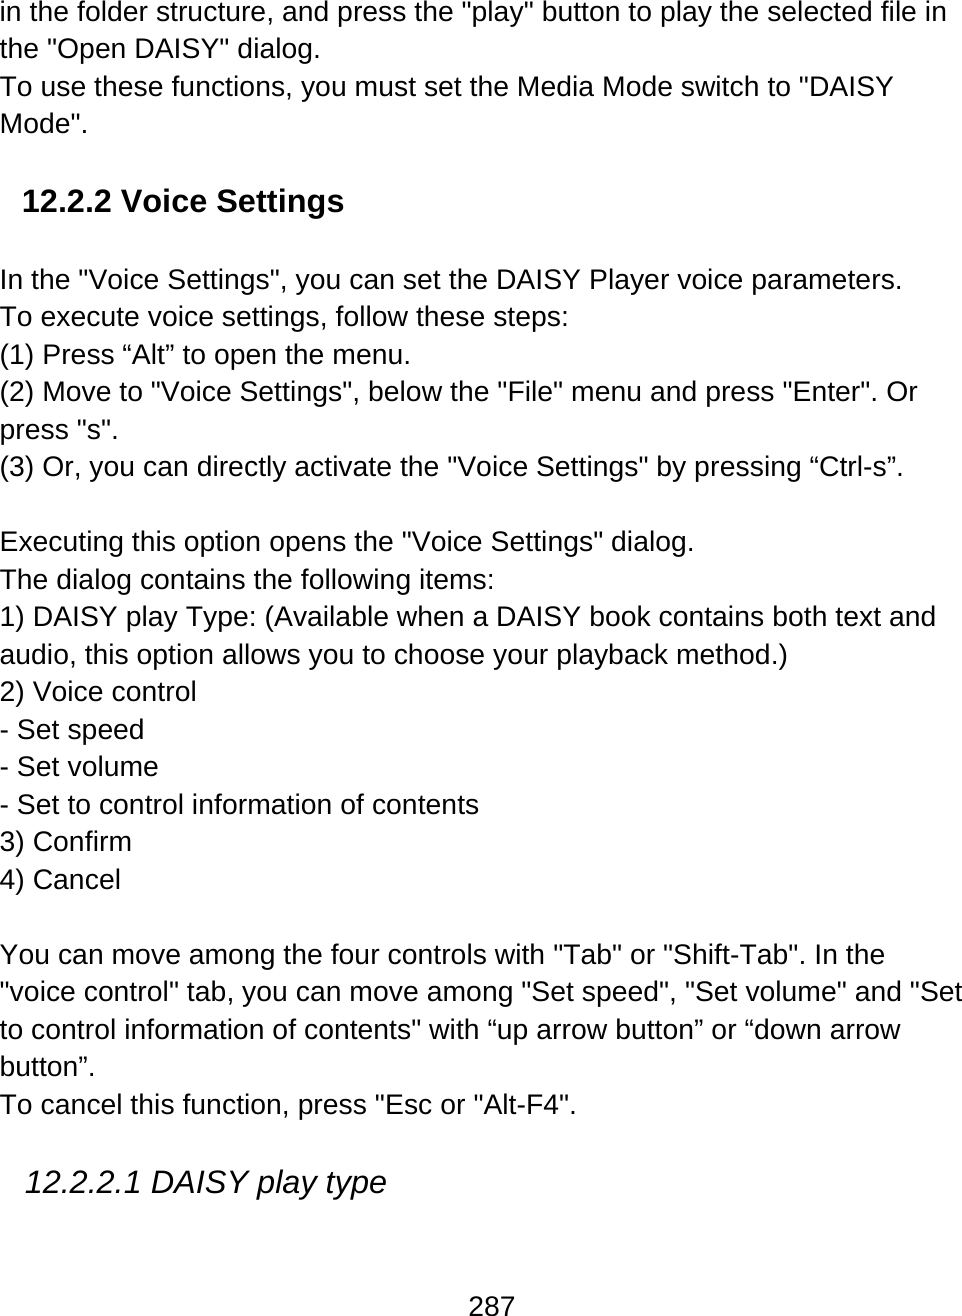 287  in the folder structure, and press the &quot;play&quot; button to play the selected file in the &quot;Open DAISY&quot; dialog. To use these functions, you must set the Media Mode switch to &quot;DAISY Mode&quot;.  12.2.2 Voice Settings  In the &quot;Voice Settings&quot;, you can set the DAISY Player voice parameters.  To execute voice settings, follow these steps: (1) Press “Alt” to open the menu.  (2) Move to &quot;Voice Settings&quot;, below the &quot;File&quot; menu and press &quot;Enter&quot;. Or press &quot;s&quot;.  (3) Or, you can directly activate the &quot;Voice Settings&quot; by pressing “Ctrl-s”.   Executing this option opens the &quot;Voice Settings&quot; dialog.  The dialog contains the following items: 1) DAISY play Type: (Available when a DAISY book contains both text and audio, this option allows you to choose your playback method.) 2) Voice control - Set speed - Set volume - Set to control information of contents 3) Confirm 4) Cancel  You can move among the four controls with &quot;Tab&quot; or &quot;Shift-Tab&quot;. In the &quot;voice control&quot; tab, you can move among &quot;Set speed&quot;, &quot;Set volume&quot; and &quot;Set to control information of contents&quot; with “up arrow button” or “down arrow button”.  To cancel this function, press &quot;Esc or &quot;Alt-F4&quot;.  12.2.2.1 DAISY play type  